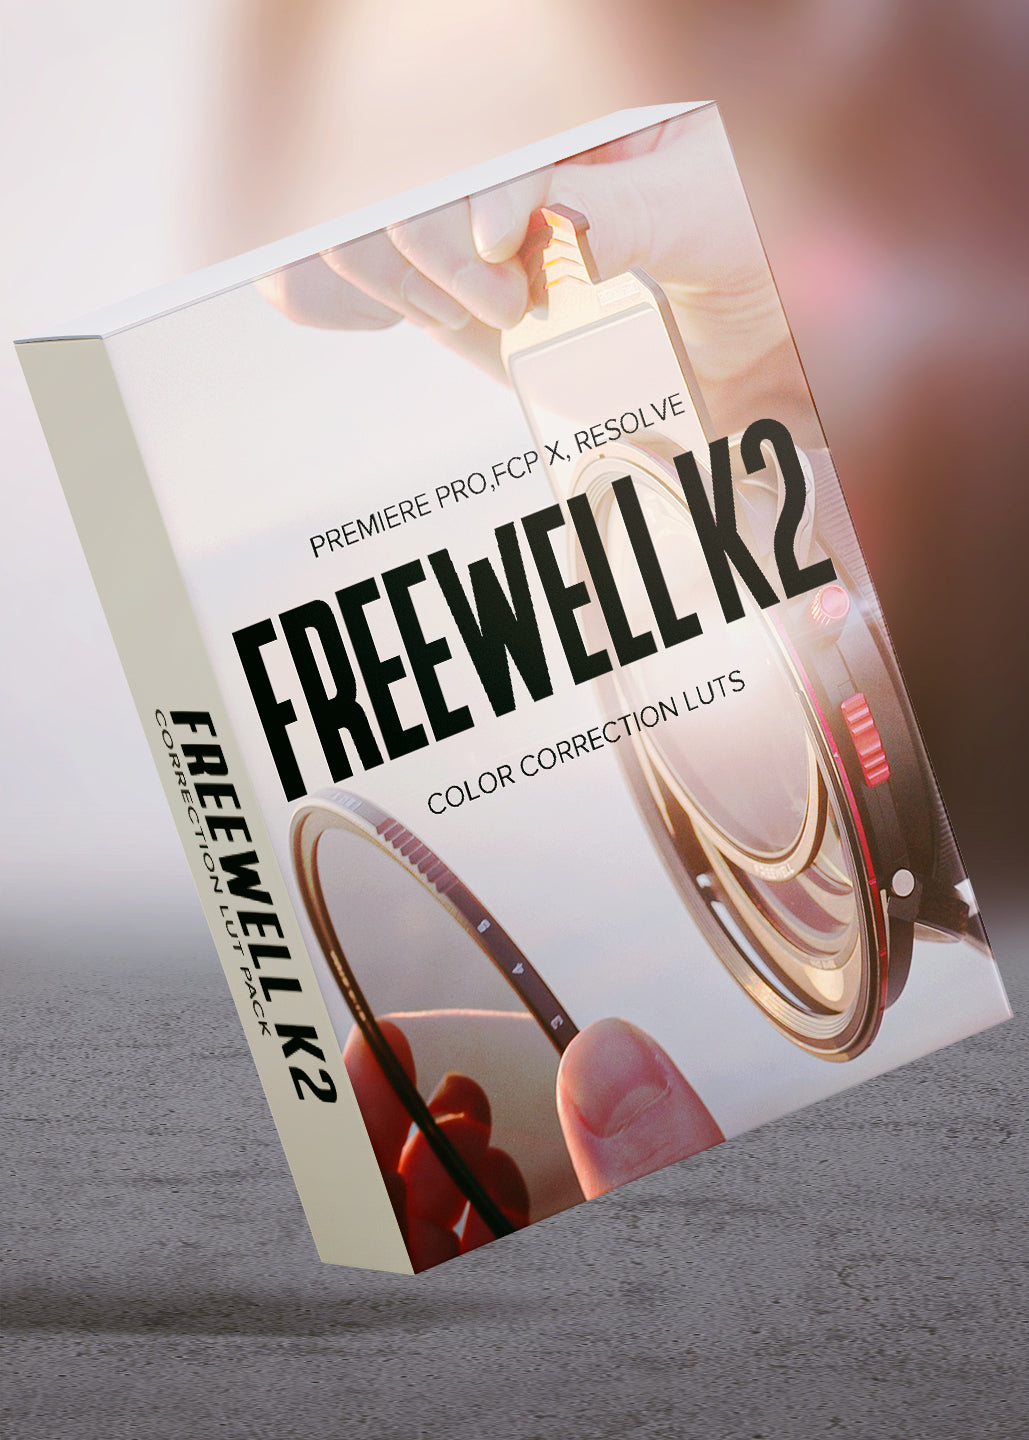 Freewell K2 Filter System Correction LUTs